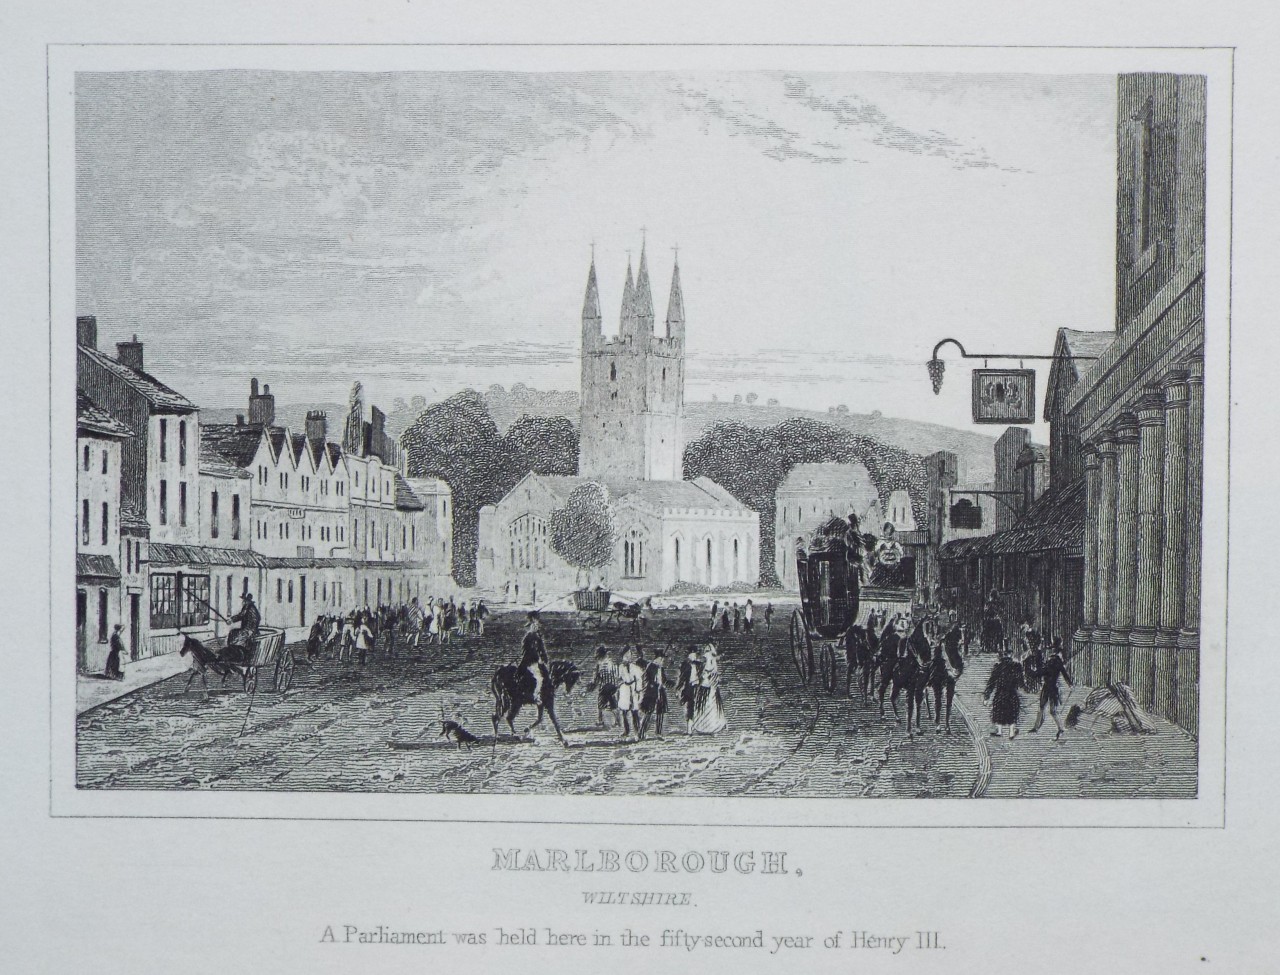 Print - Marlborough, Wiltshire. A Parliament was held here in the fifty-second year of Henry III.